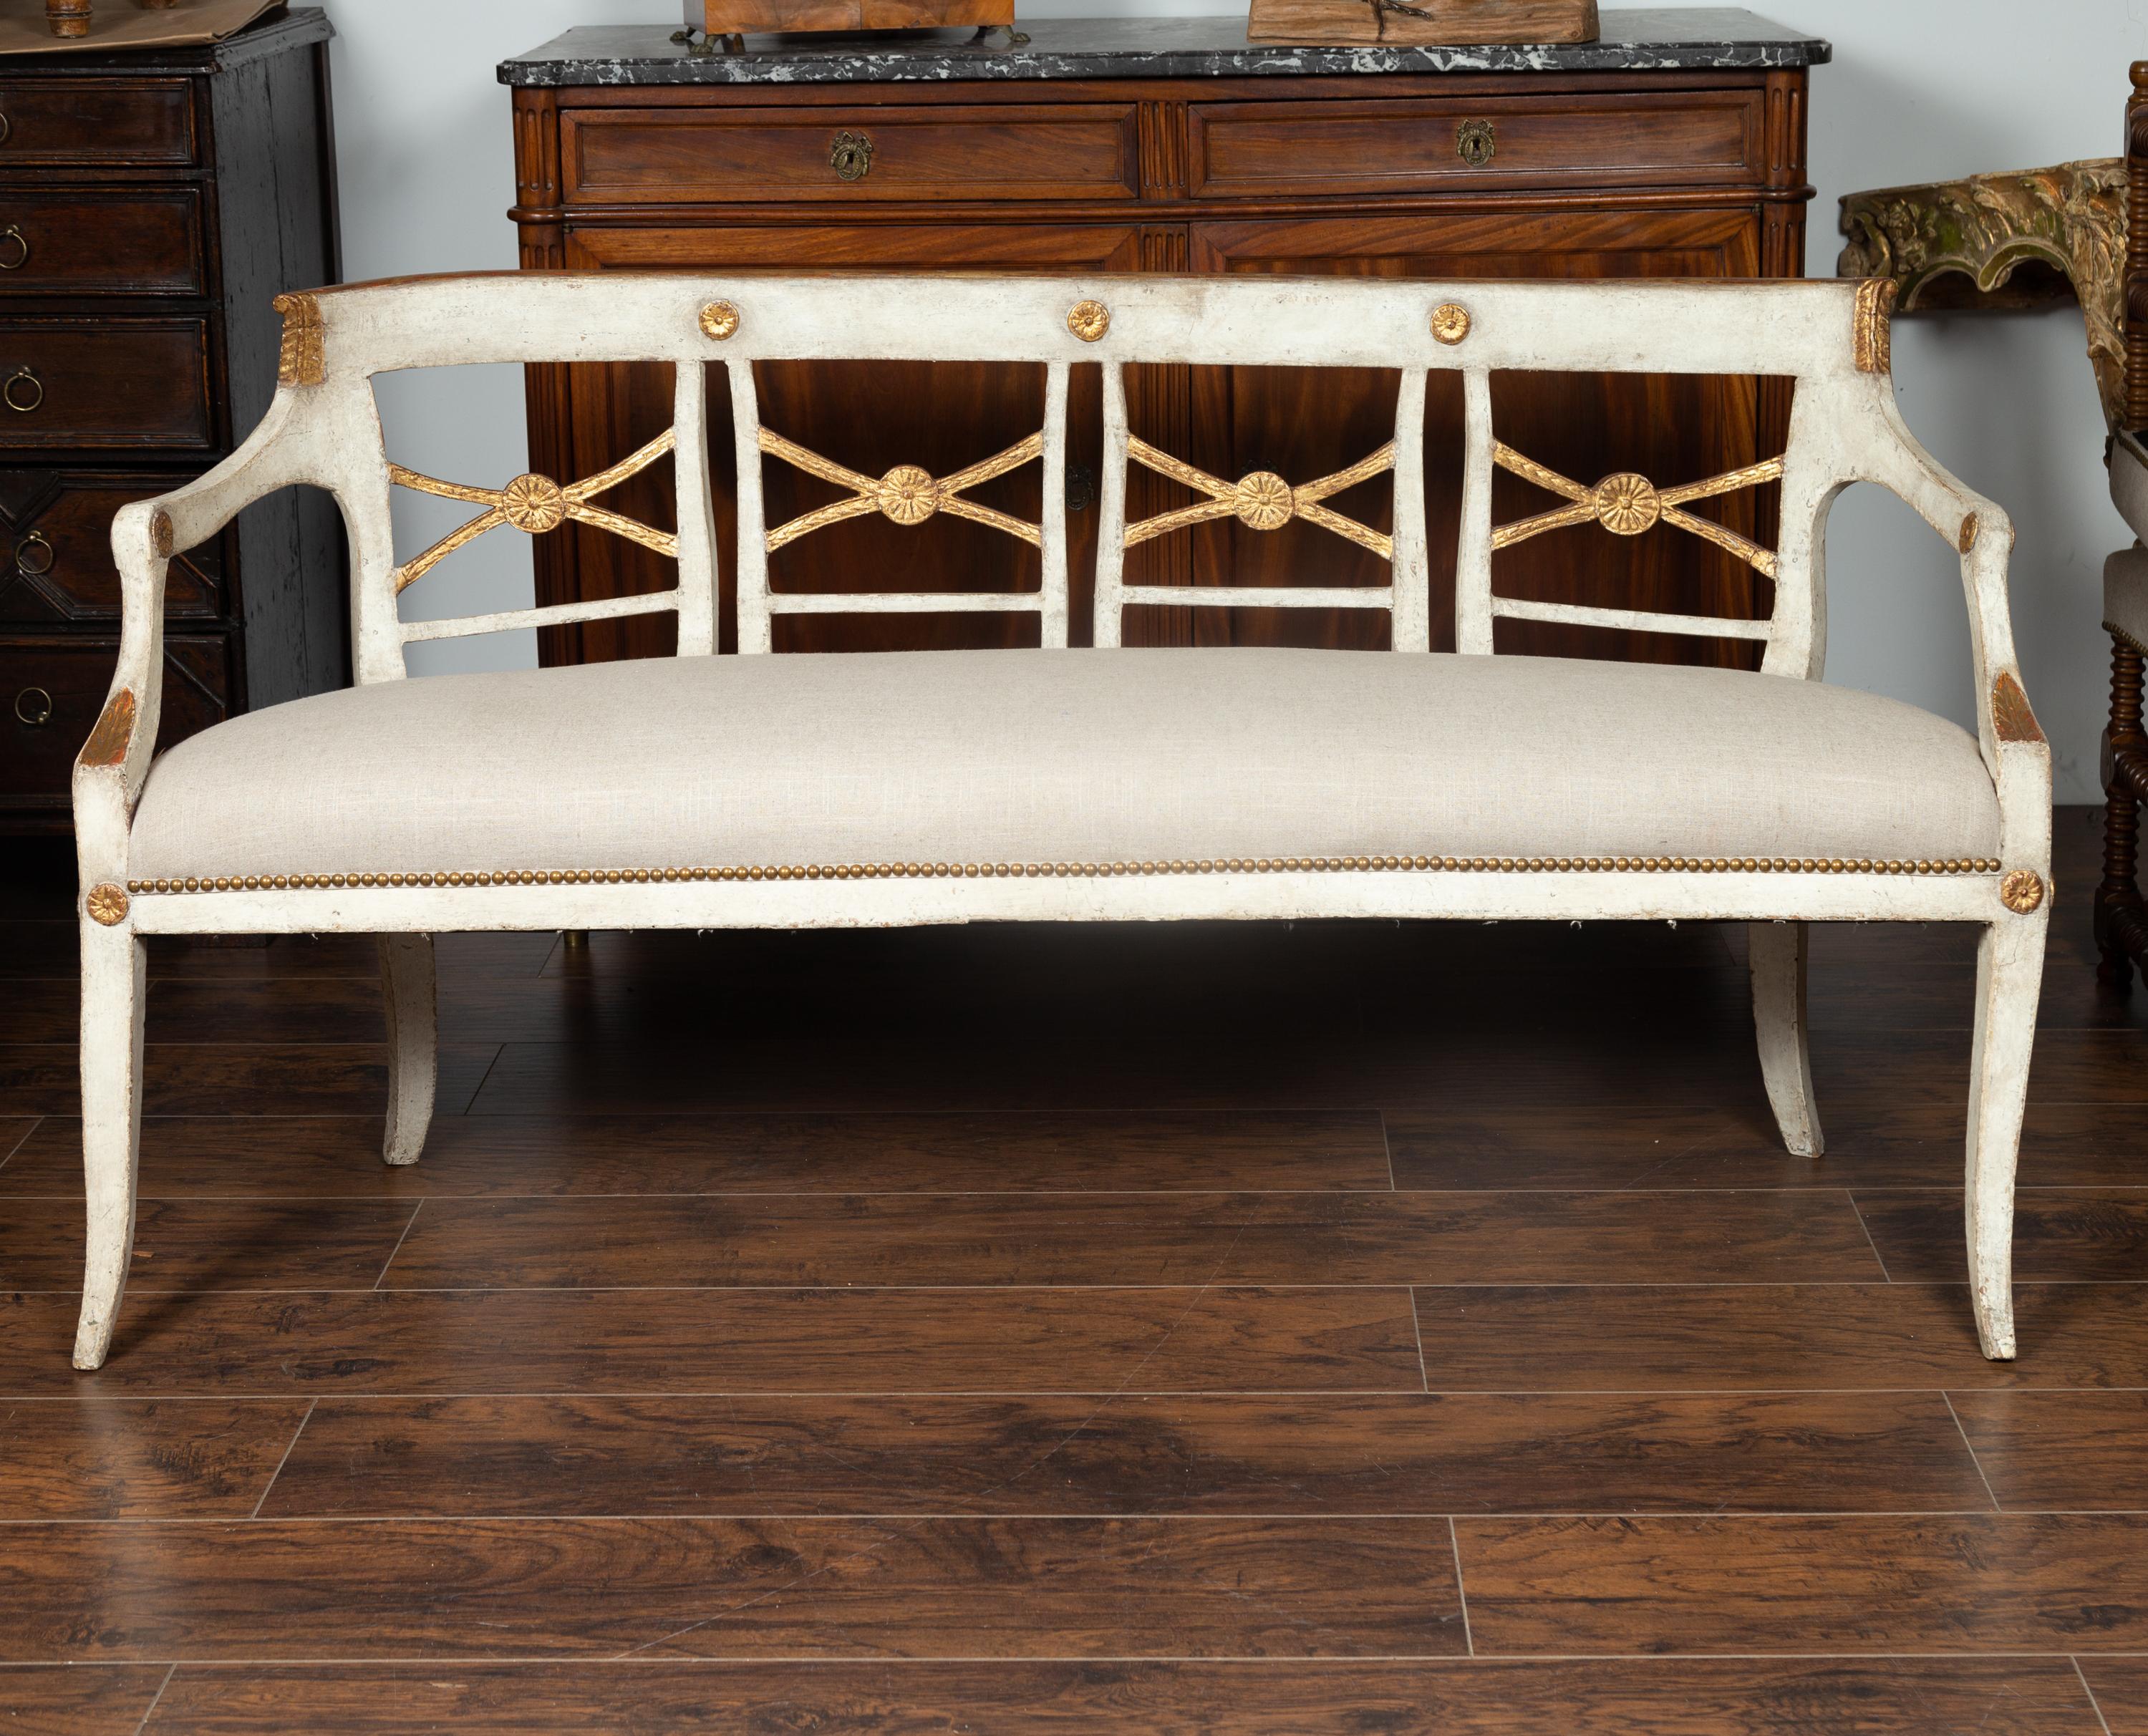 Neoclassical Italian 1860s Painted Wood Bench with Gilded Accents and New Upholstery For Sale